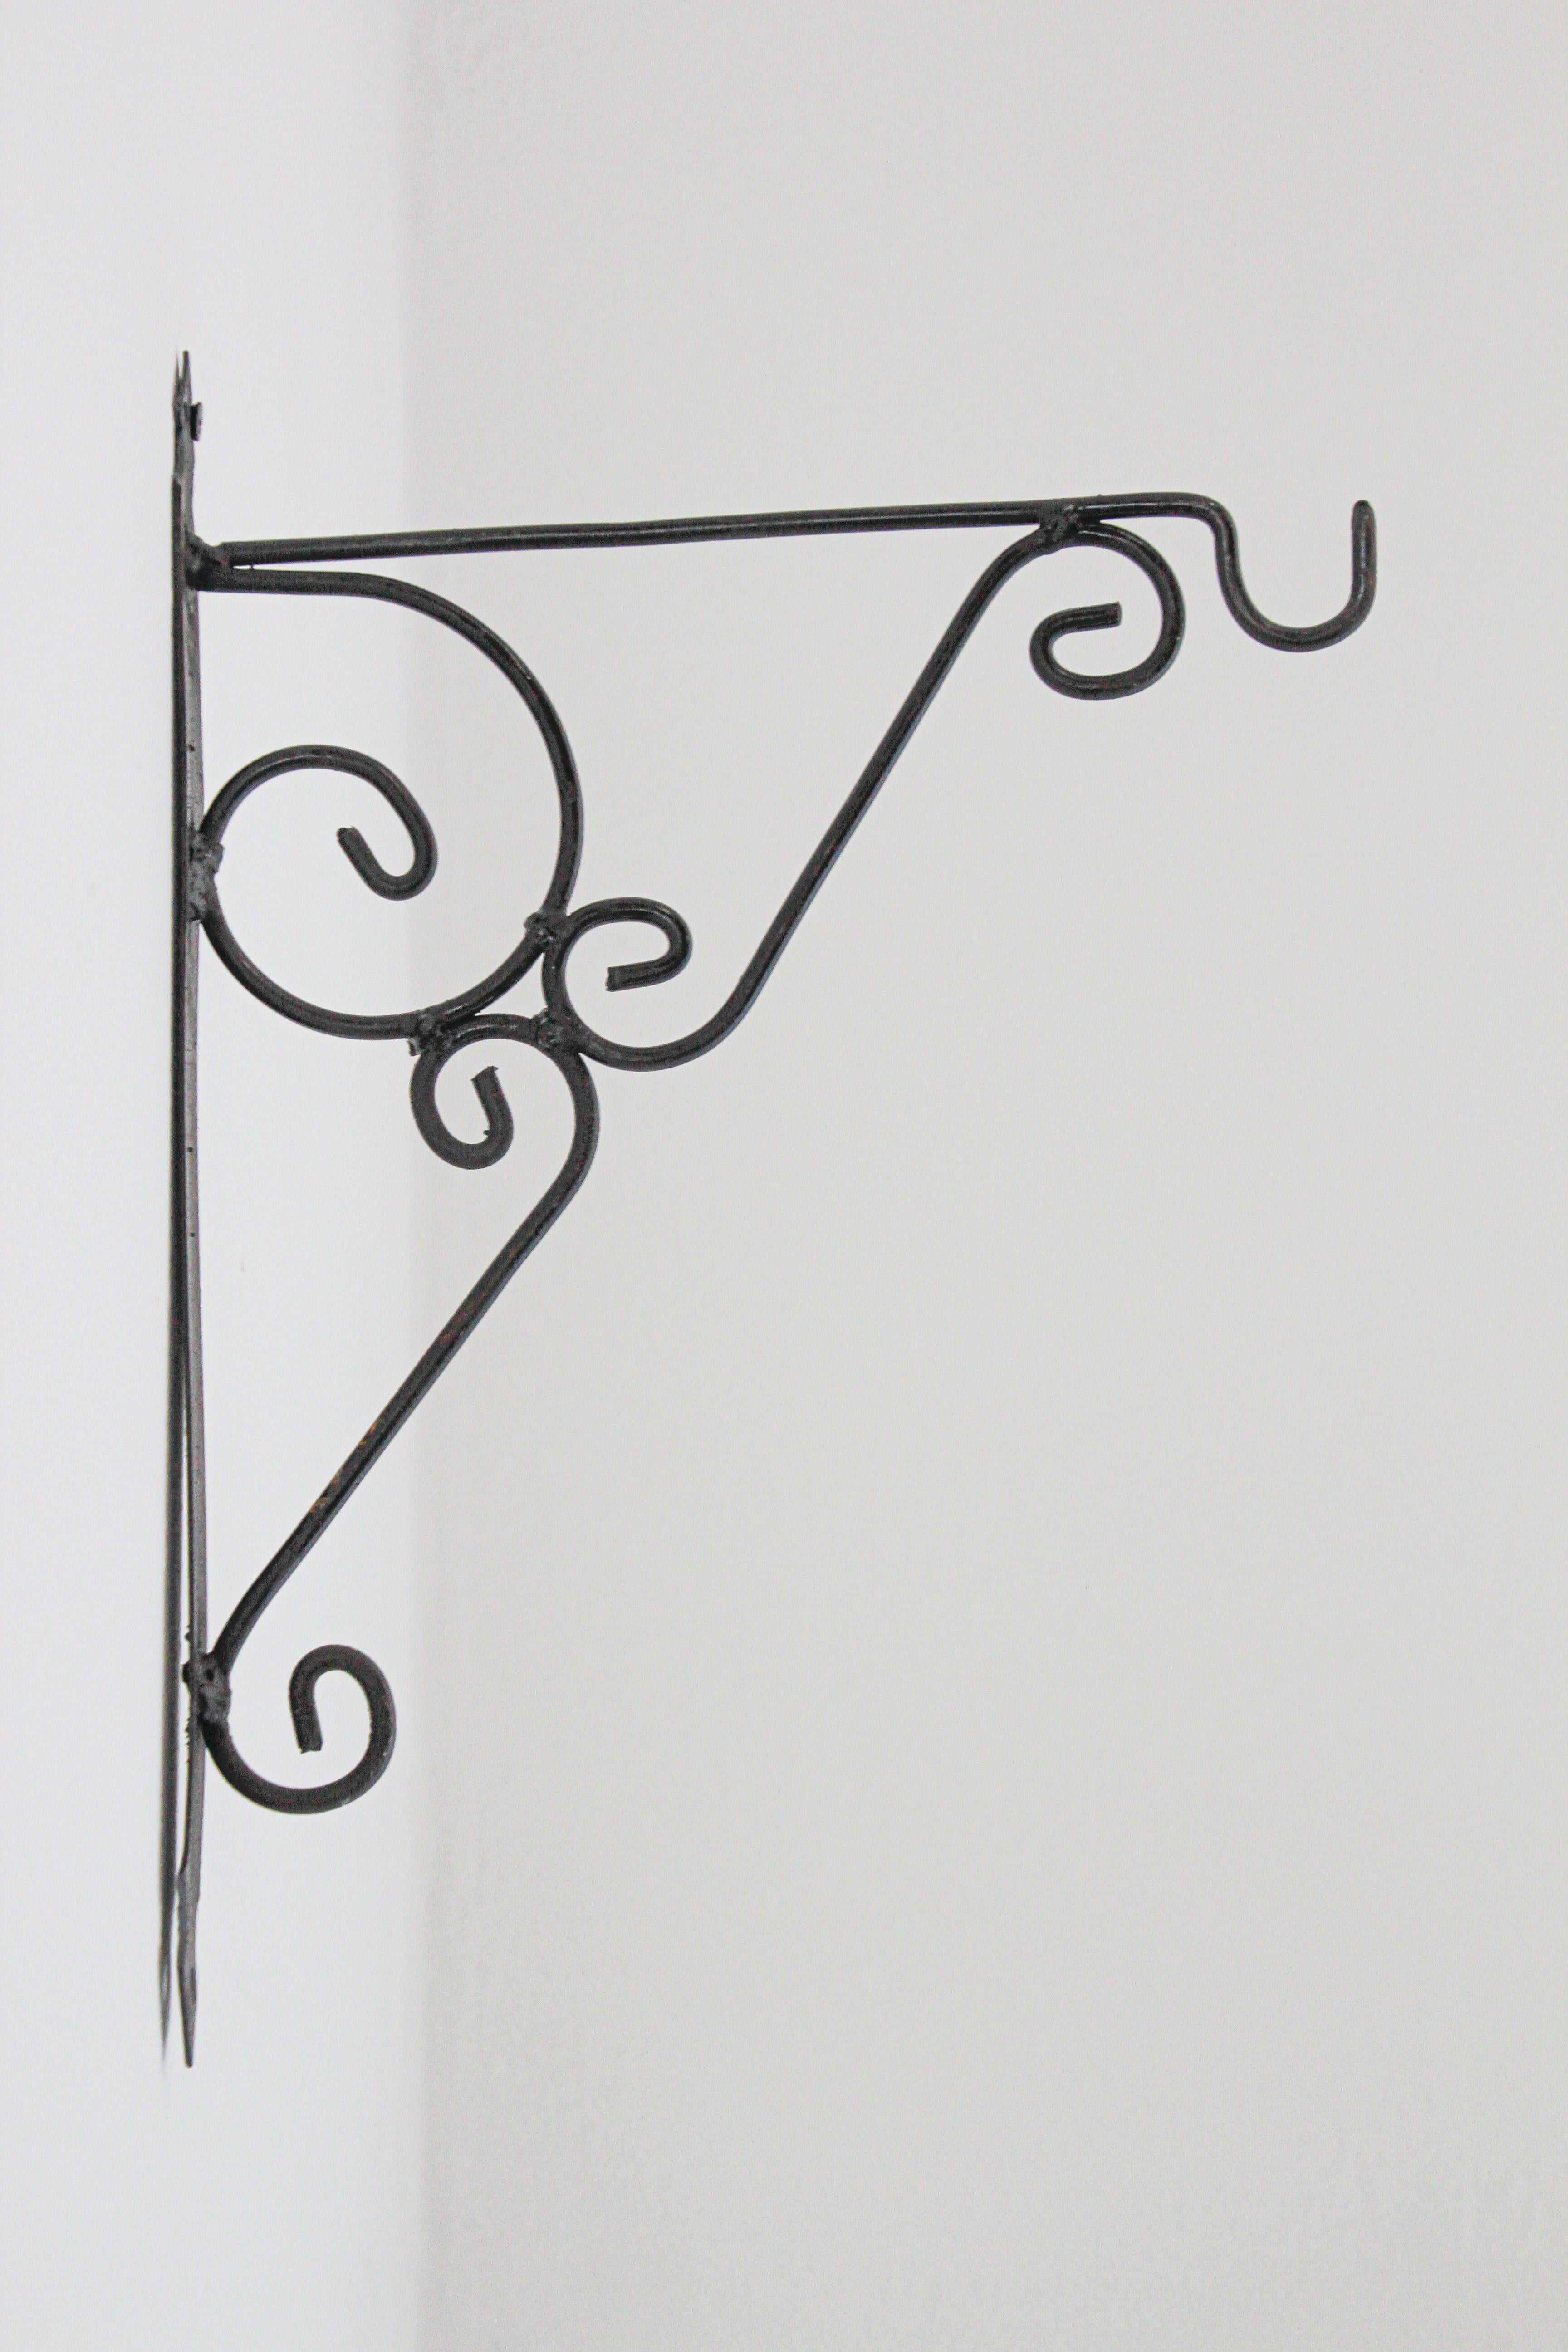 Hand crafted iron scroll design wall bracket. 
Vintage wrought iron handcrafted wall-bracket for lanterns or signs.
Perfect for hanging lights or plants outdoors.
Scrolling wall-mounted iron brackets.
Multiple available.
Dimensions: Projection: